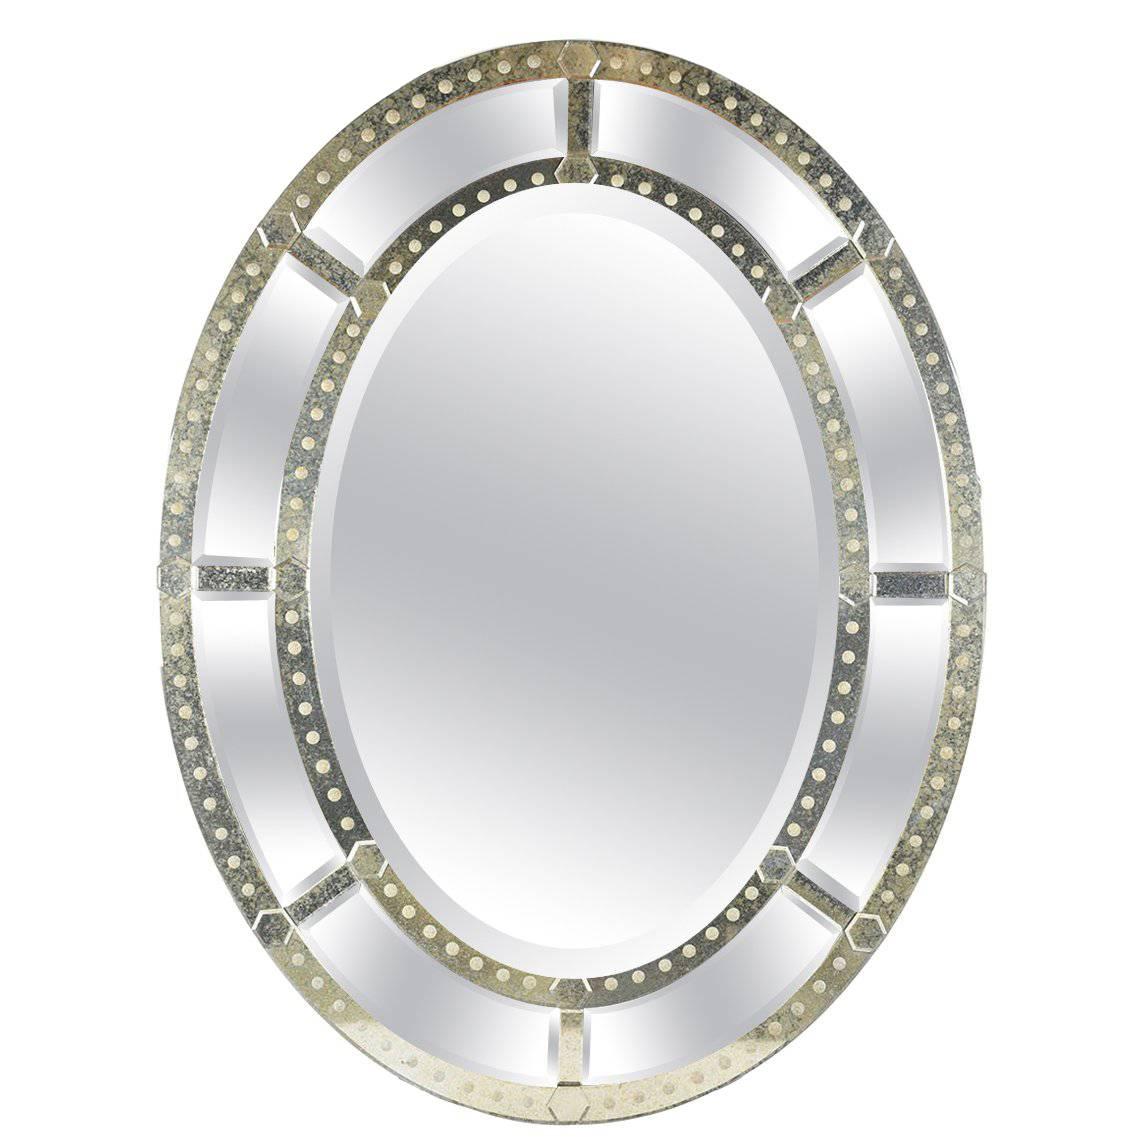 Large Venetian-Style Oval Standing Mirror